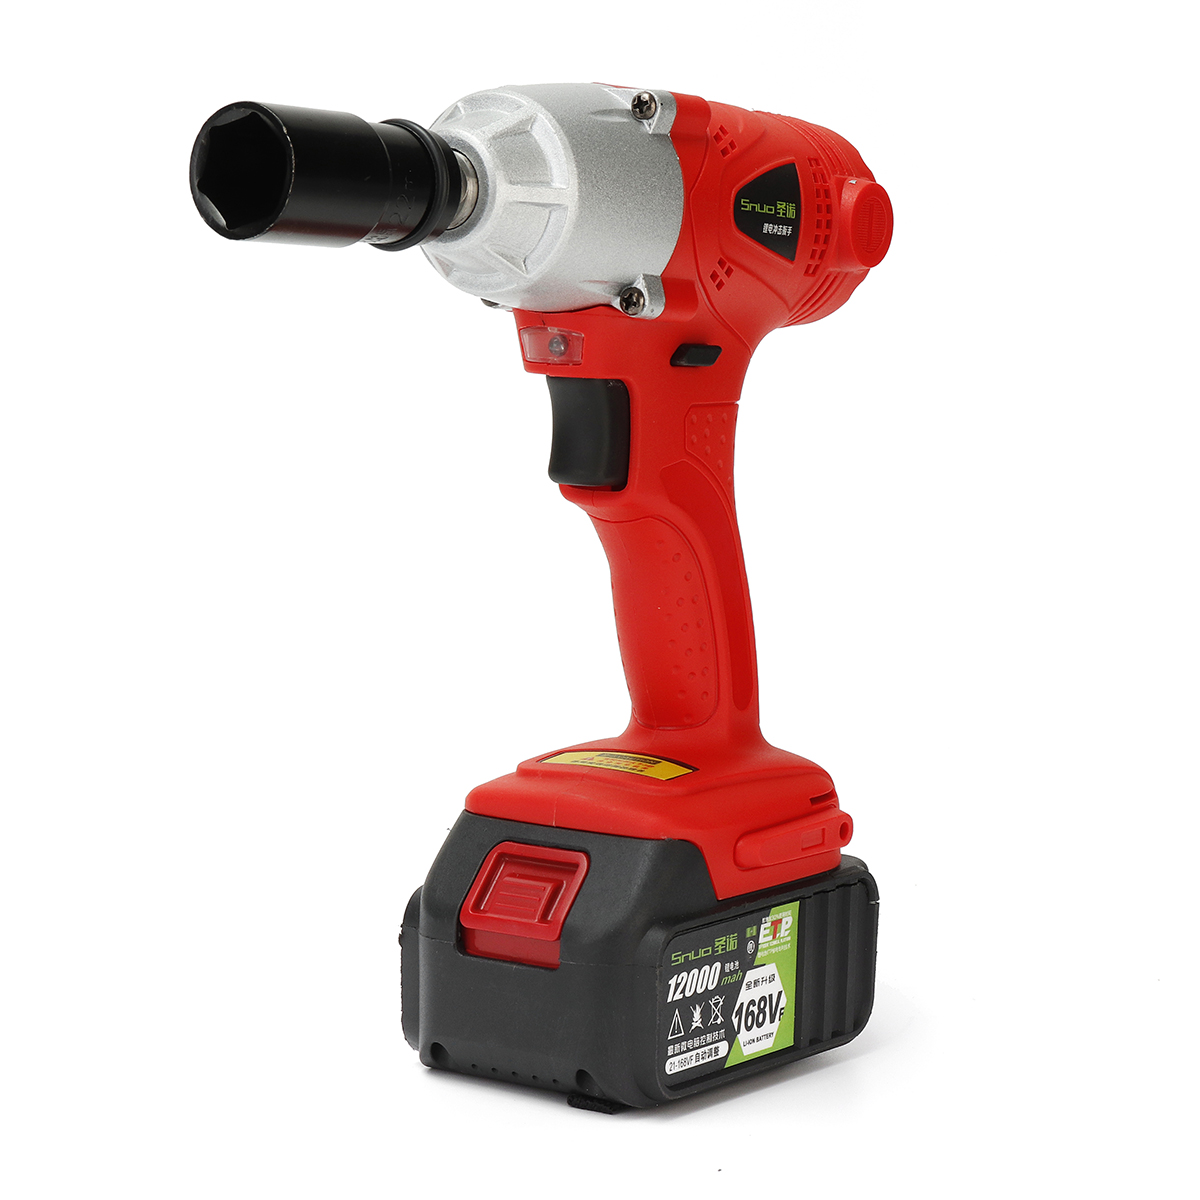 168VF-12quot-320NM-Electric-Cordless-Impact-Wrench-With-12000mAh-Li-ion-1600833-1